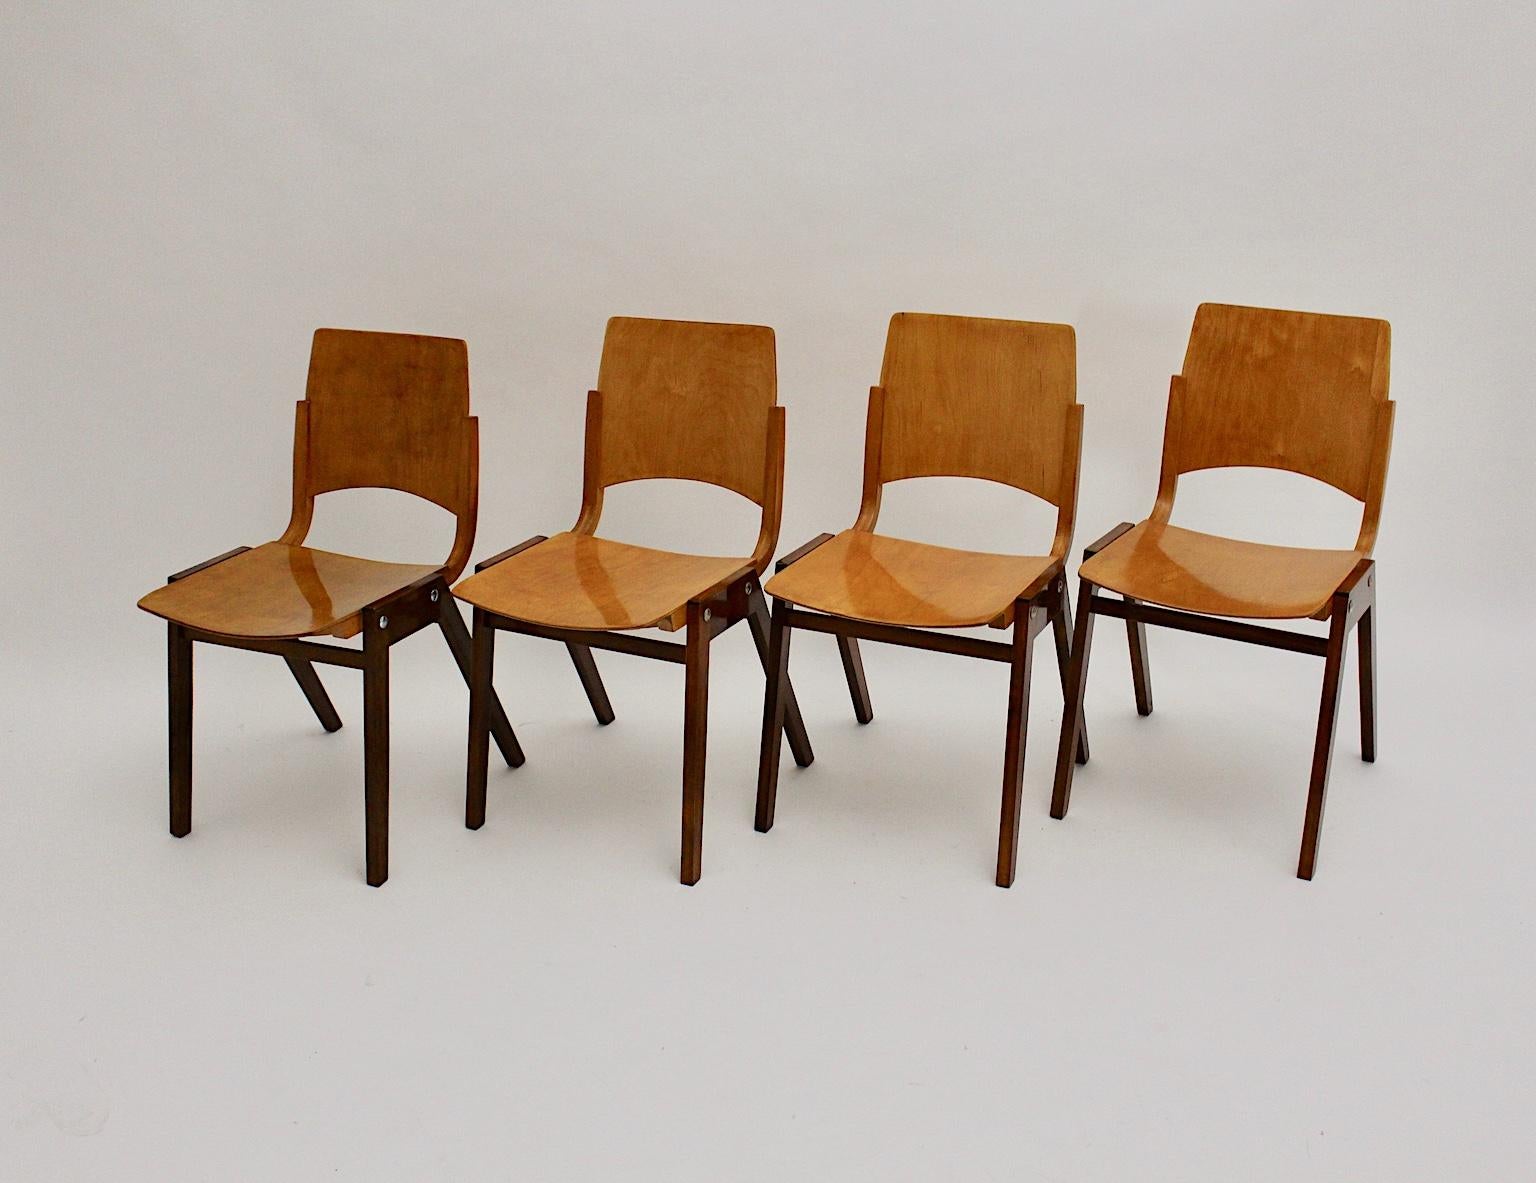 Mid-20th Century Mid-Century Modern Vintage Set of Four Dining Chair Roland Rainer, 1952, Austria For Sale